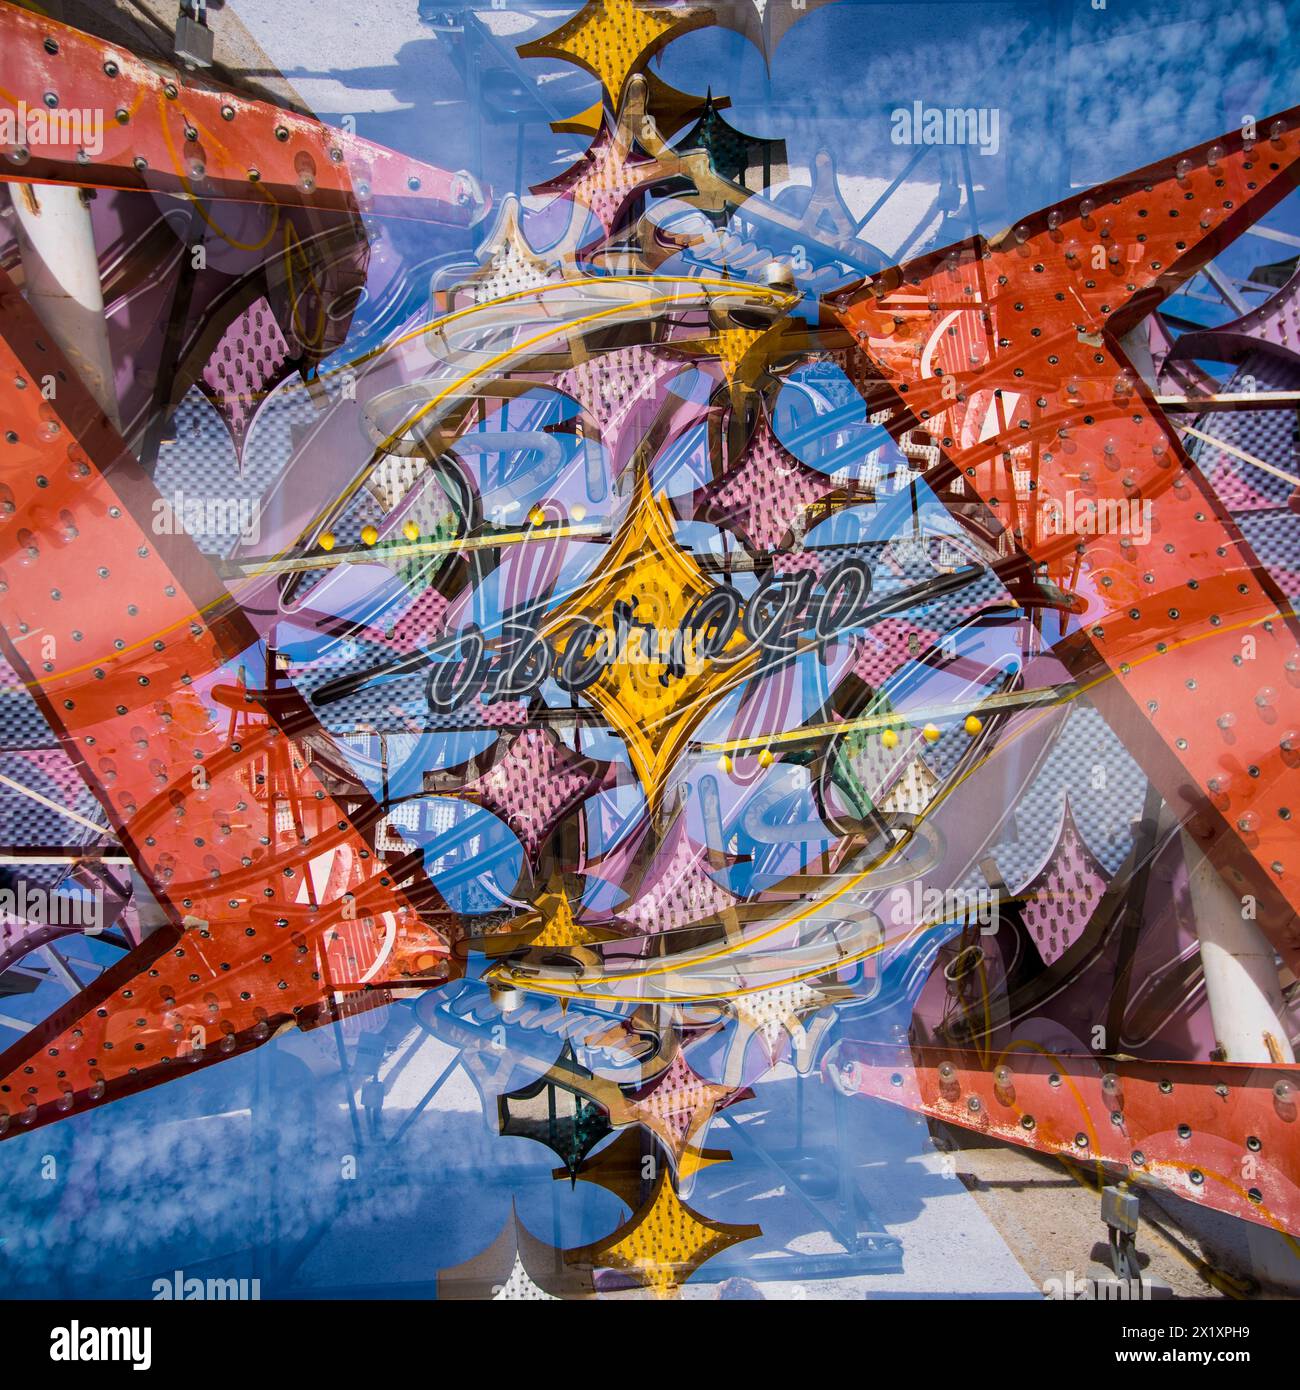 Double exposure of abandoned and discarded neon Stardust and Liberace autograph signs in the Neon Museum aka Neon boneyard in Las Vegas, Nevada. Stock Photo